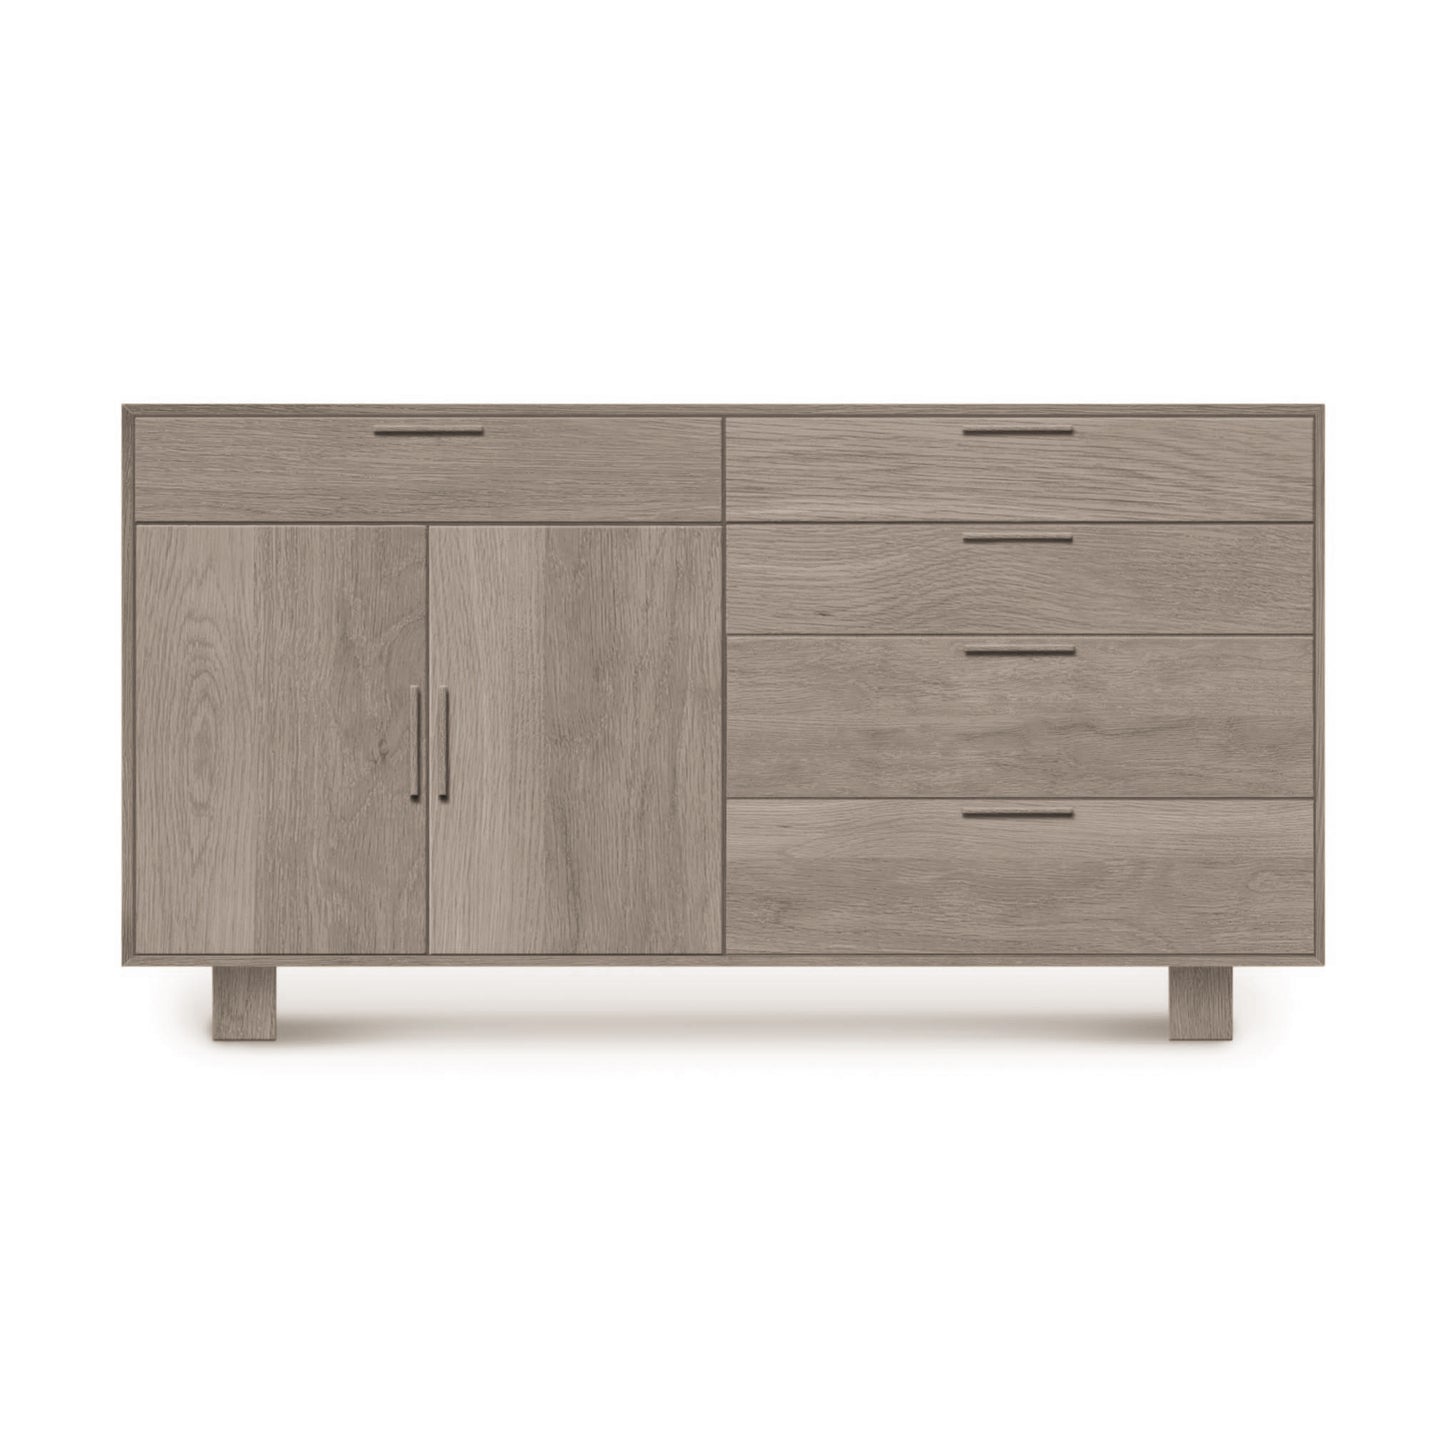 A mid-century modern Iso Oak 2 Door, 5 Drawer Buffet from Copeland Furniture with a combination of drawers and a cabinet door on short legs, isolated against a white background.